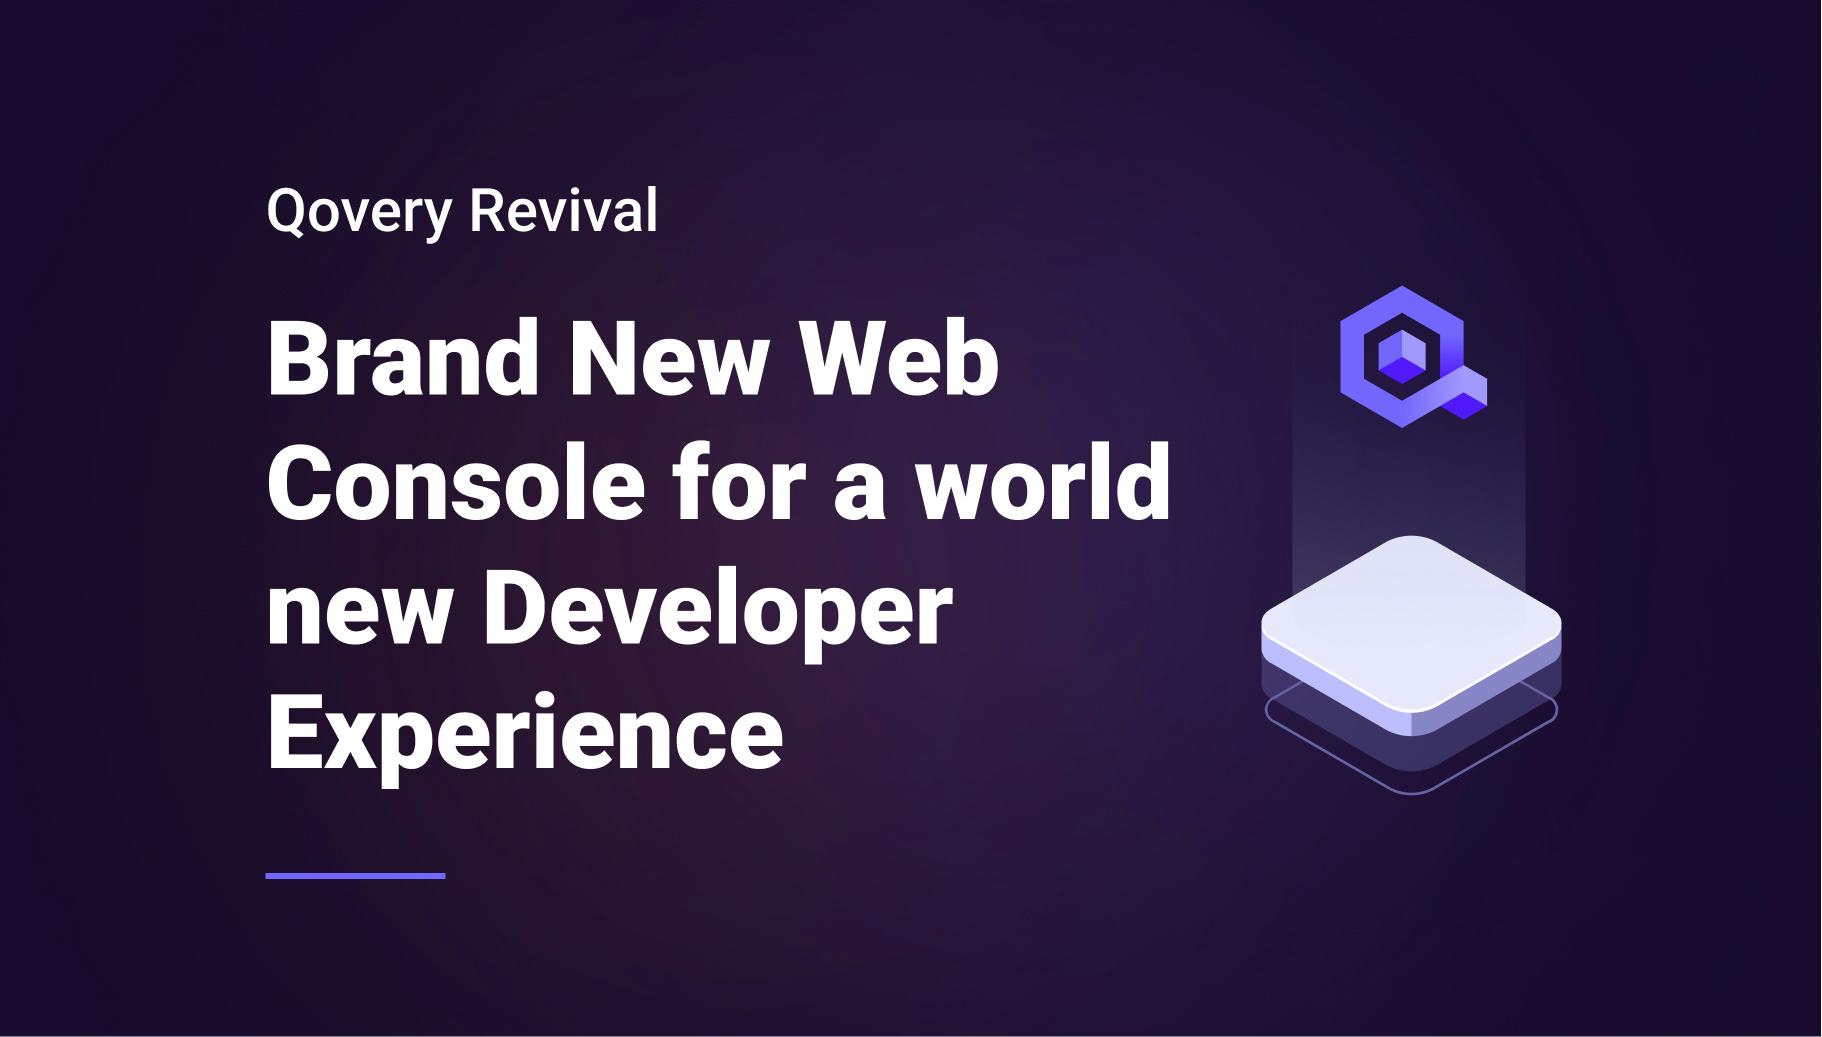 Qovery revival: Brand New Web Console for a world new Developer Experience